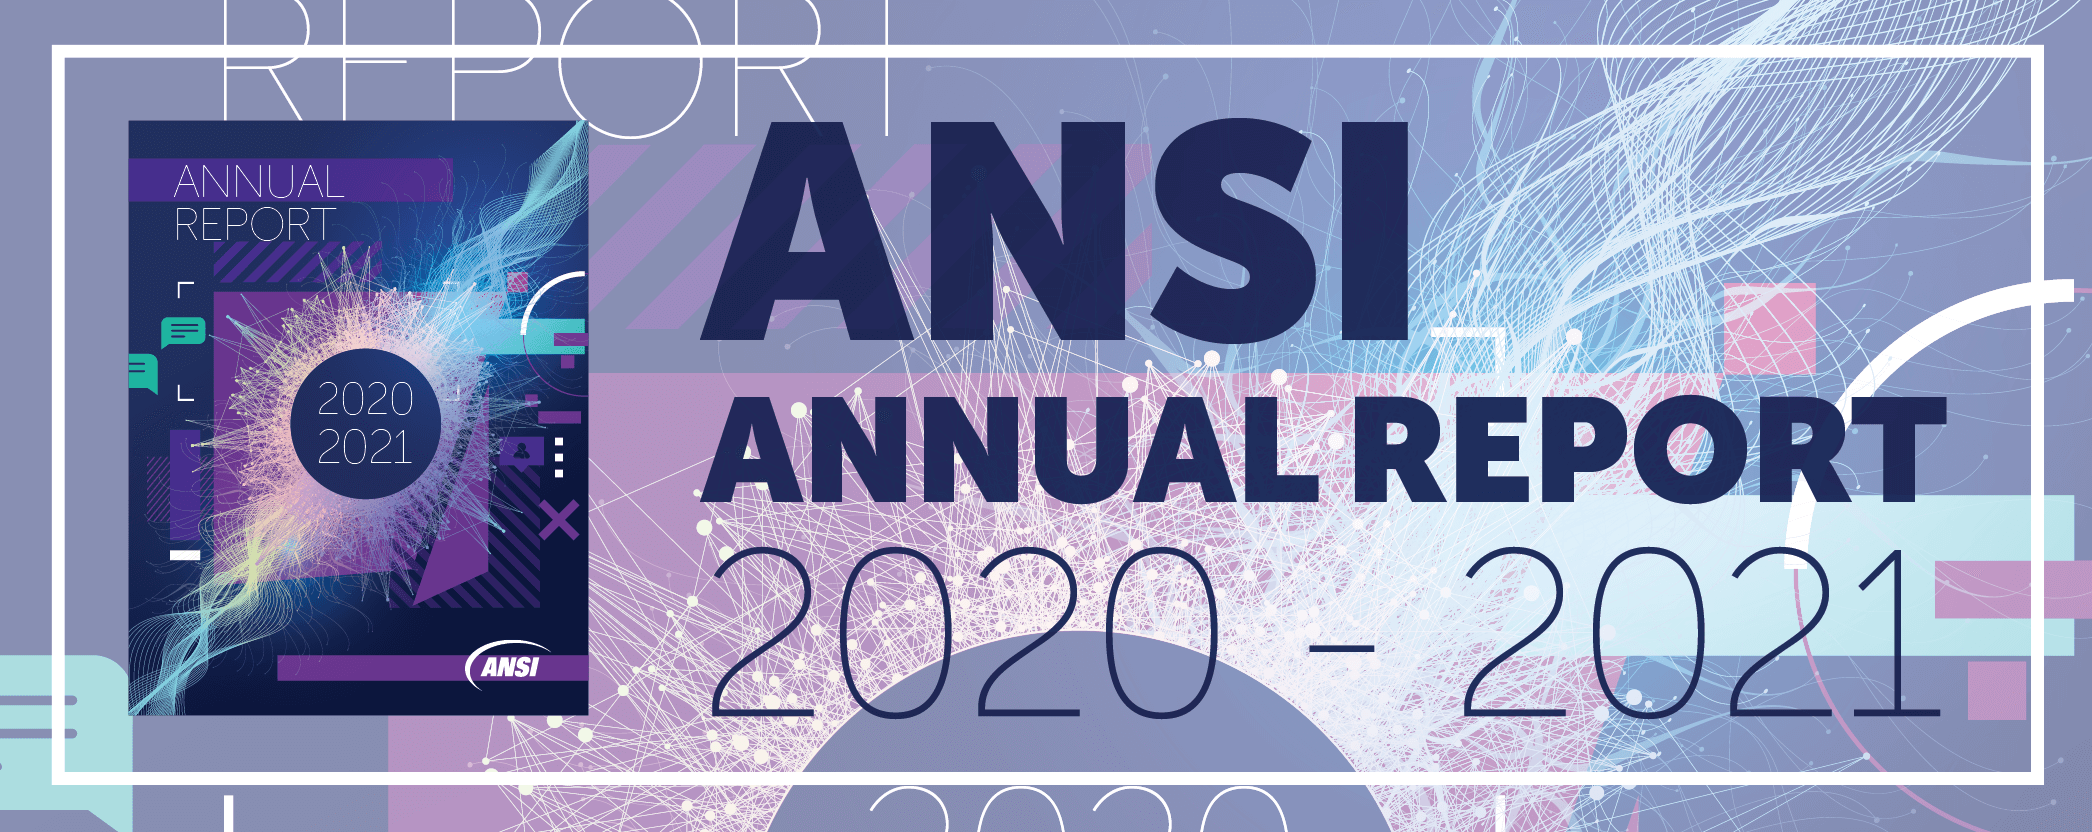 ANSI Annual Report 2020-2021 image